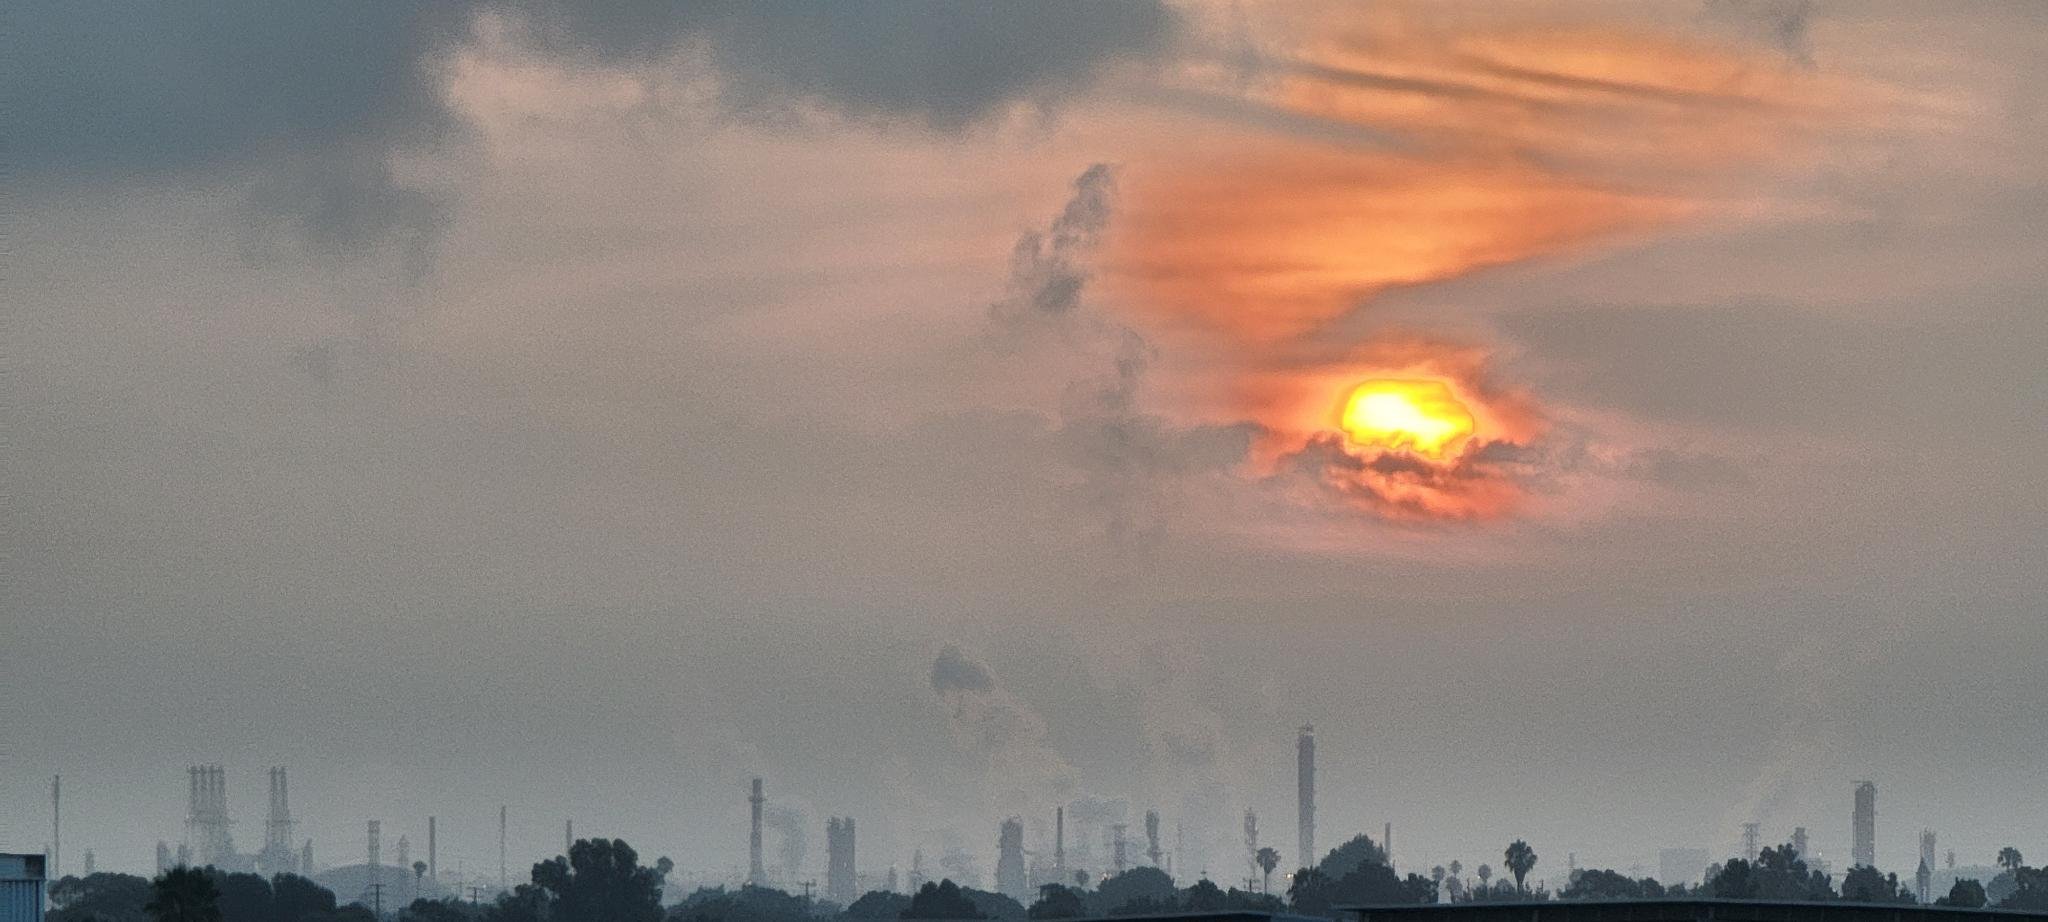 An oil refinery with the sun in the background leaving red straks in the clouds.